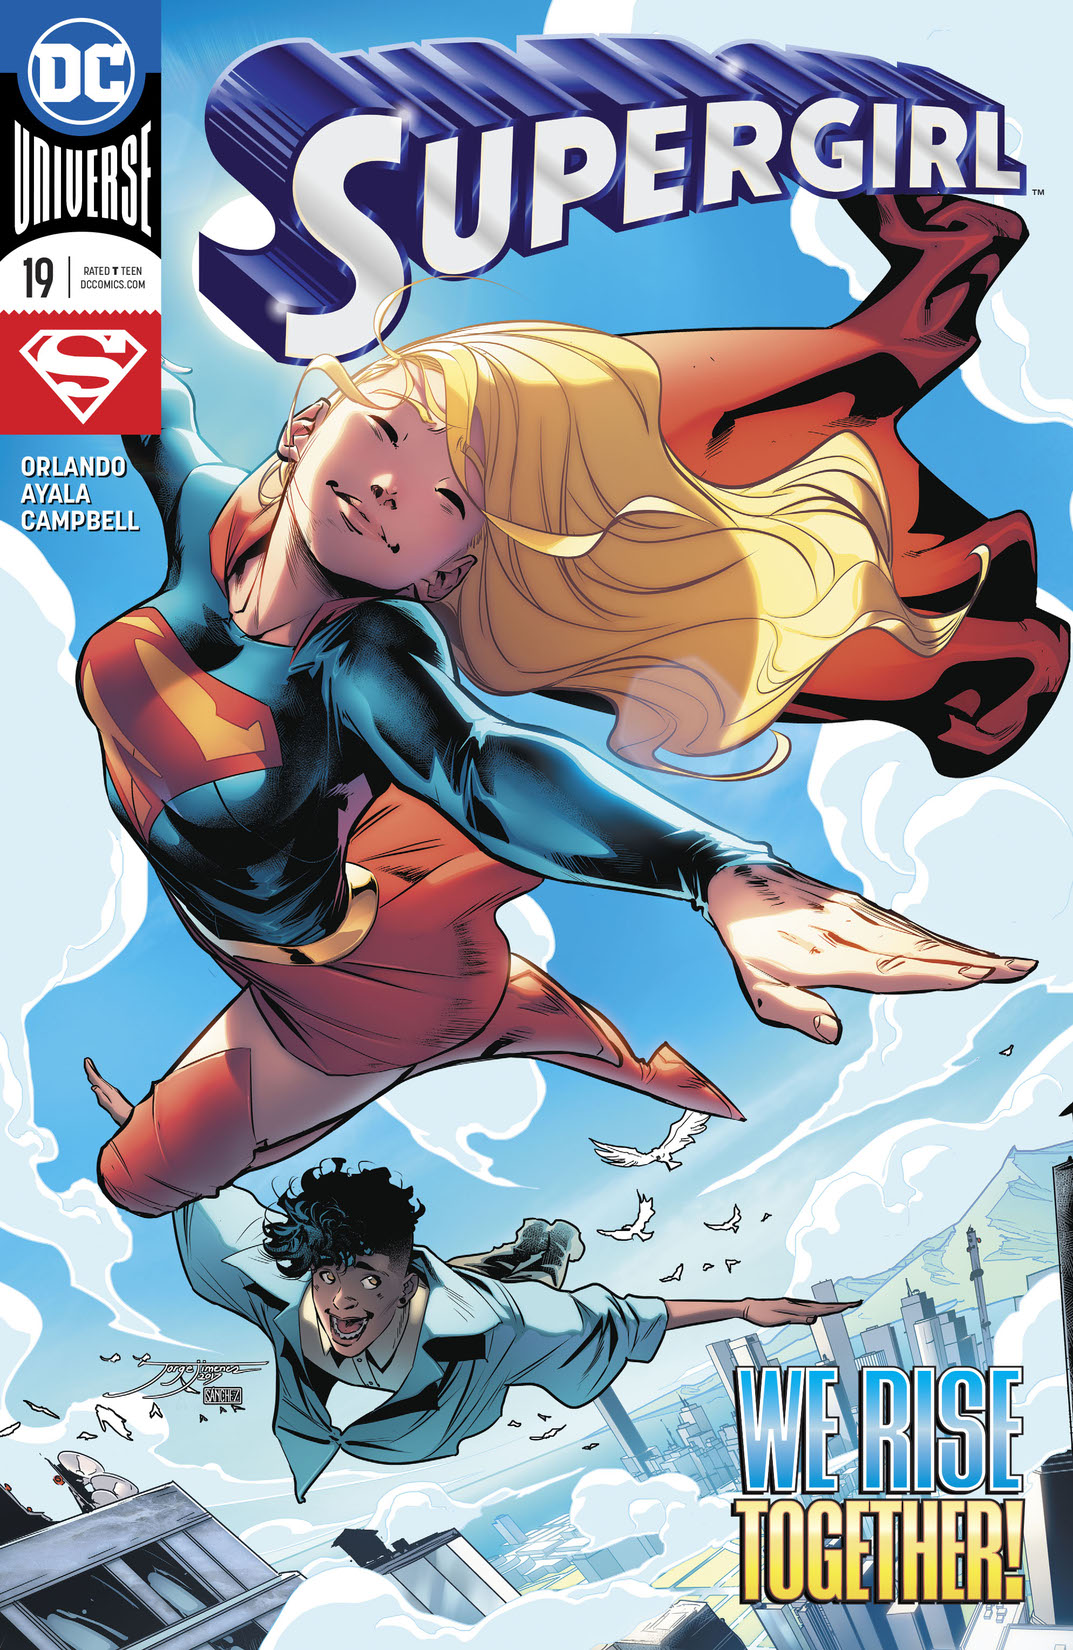 Supergirl (2016-) #19 preview images